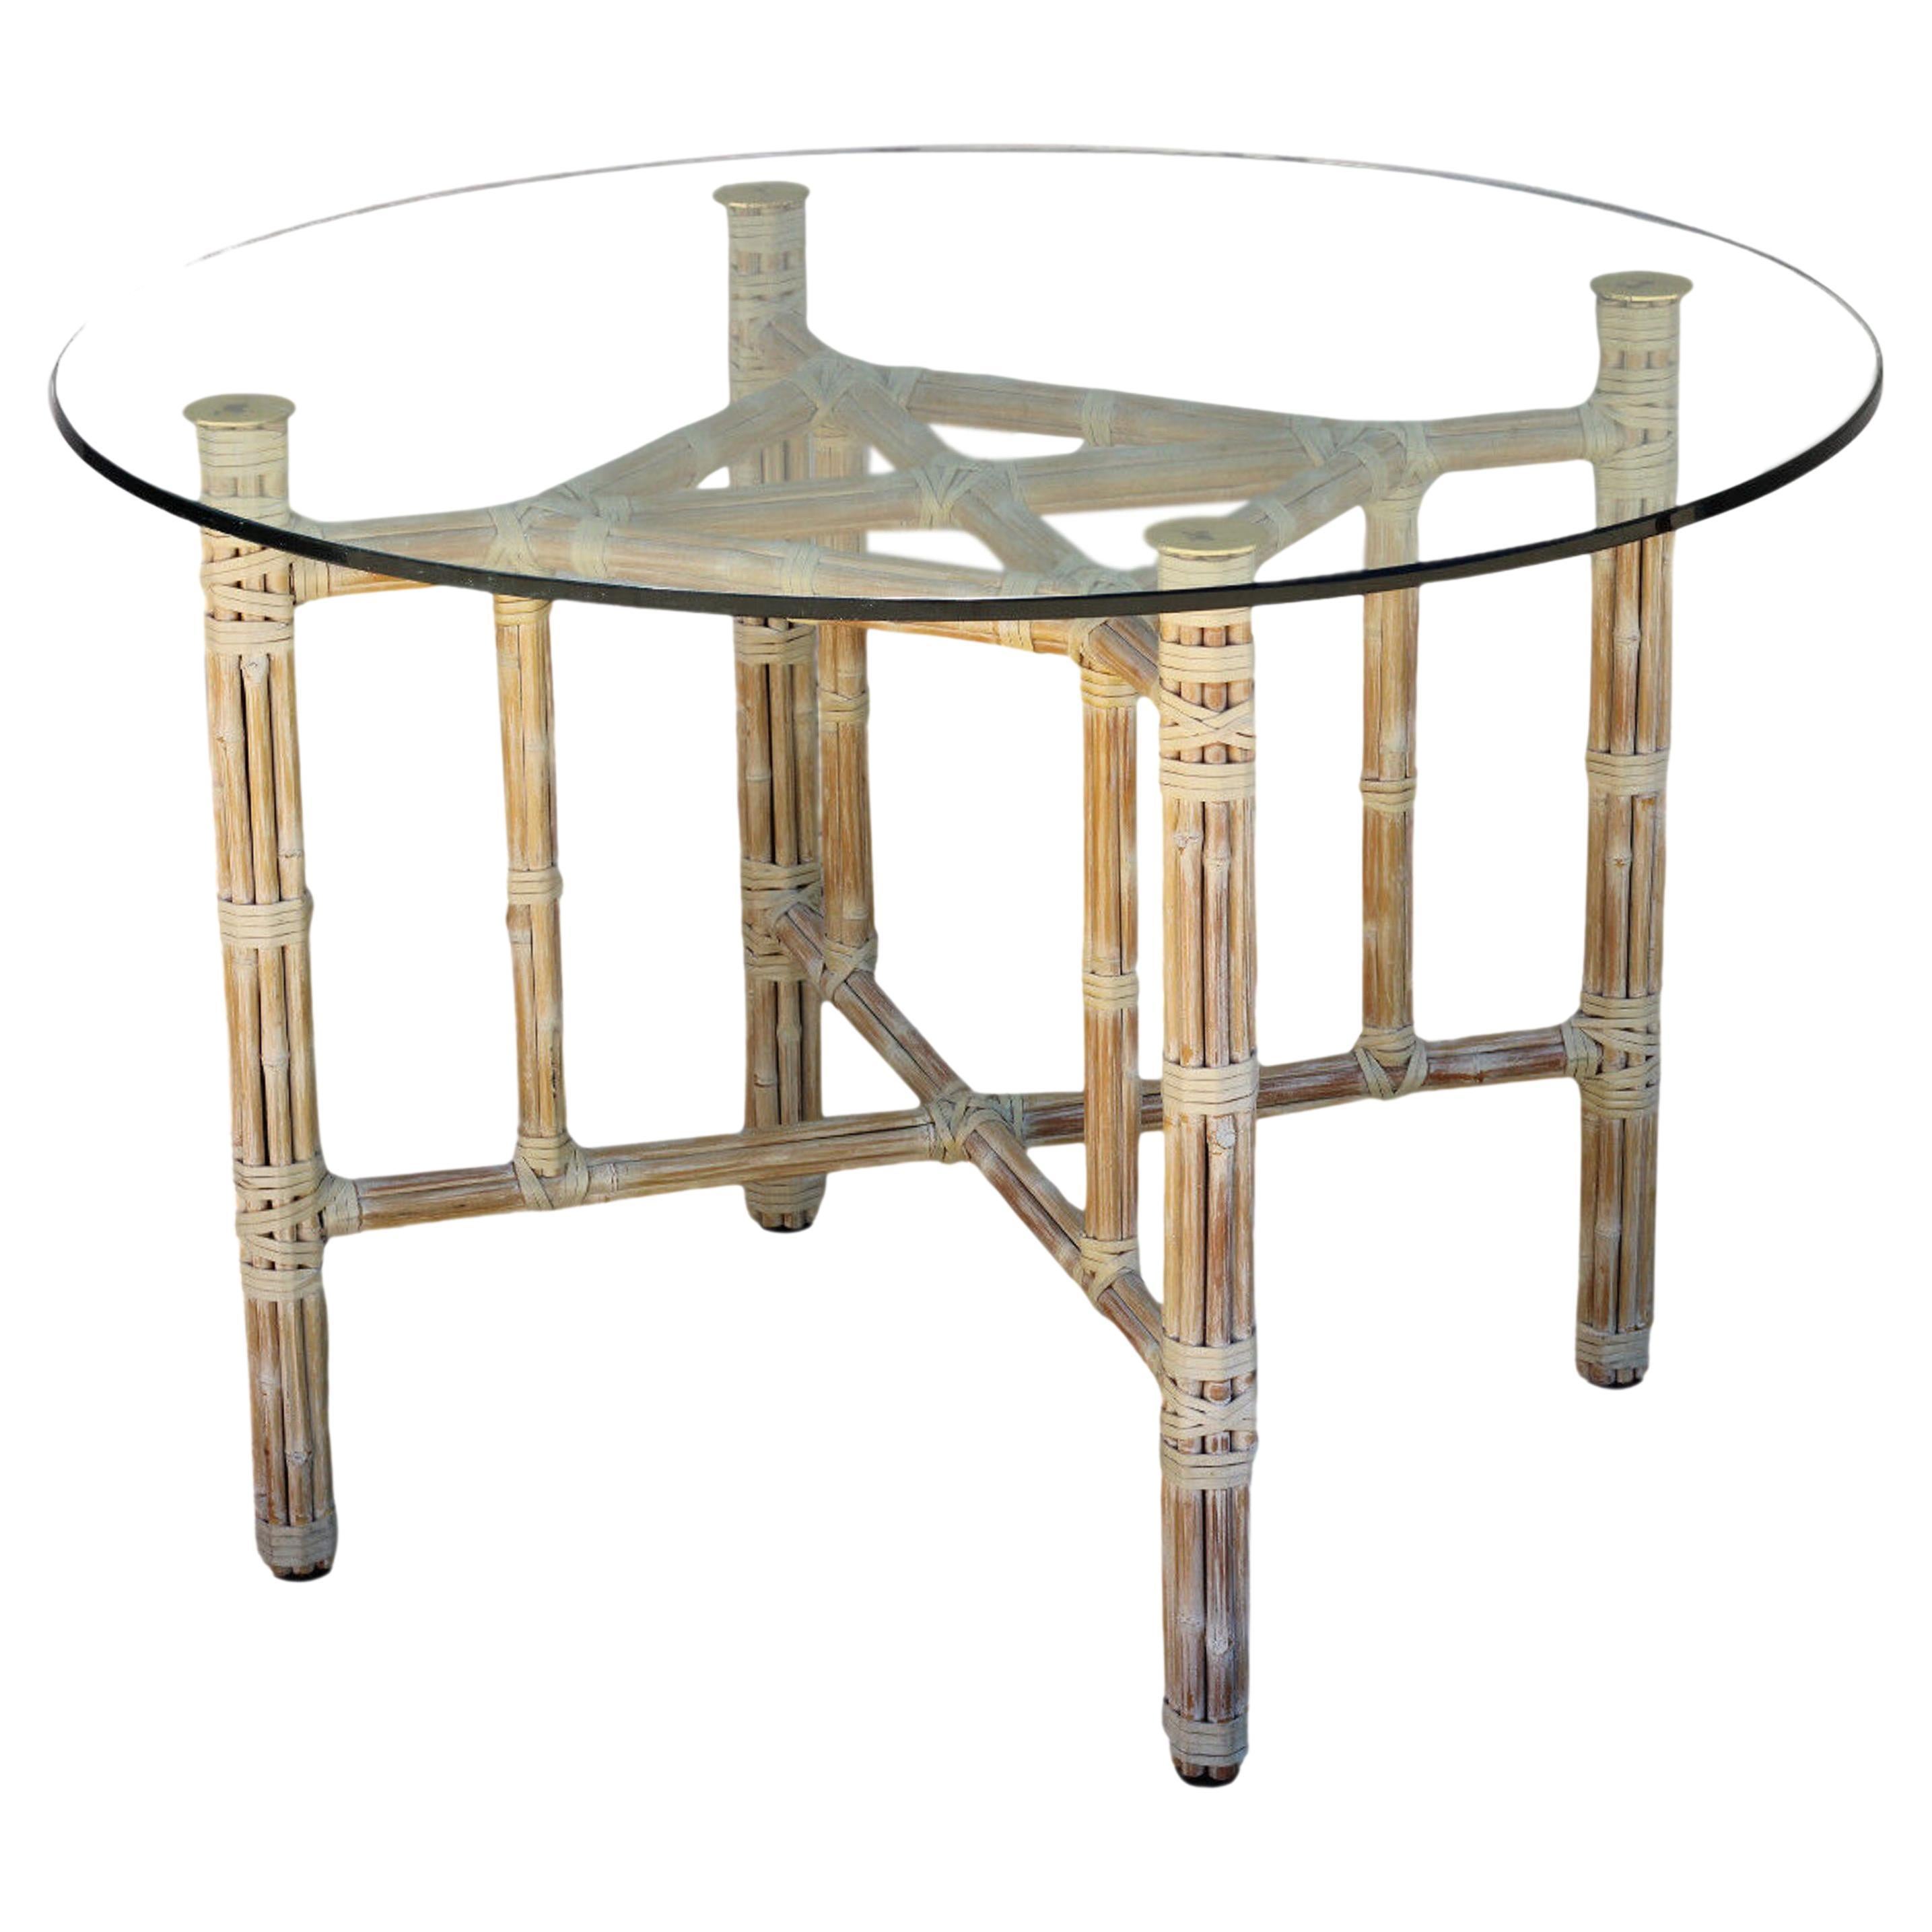 McGuire Organic Modern Bamboo Dining Table Base For Sale